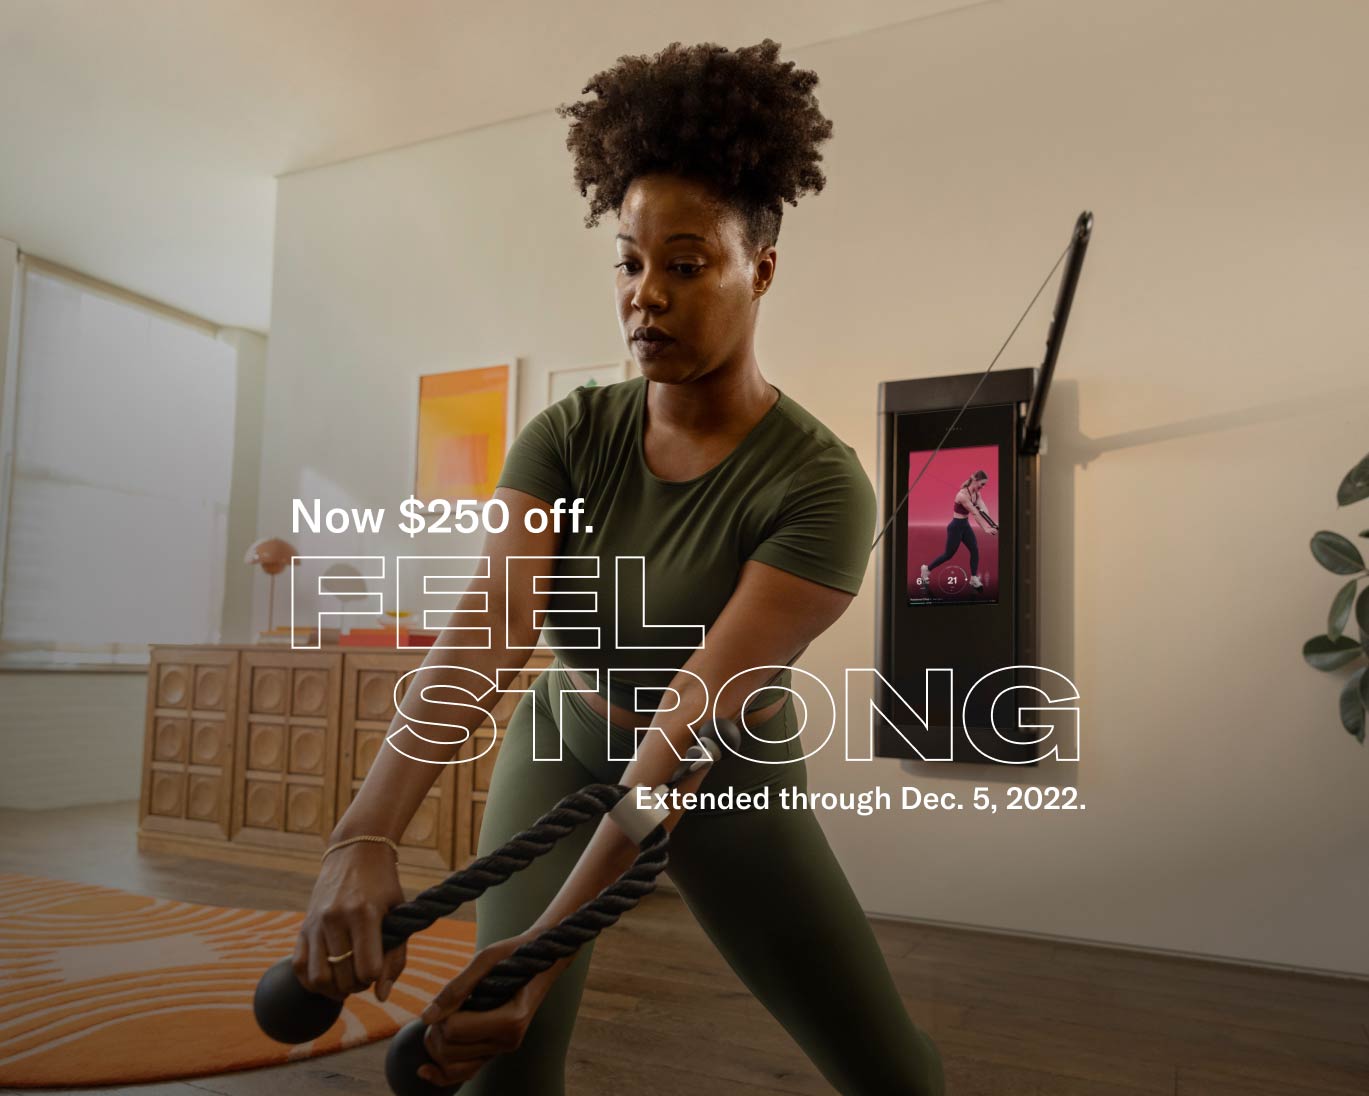 Now $250 Off. Feel Strong. Extended through December 5, 2022.